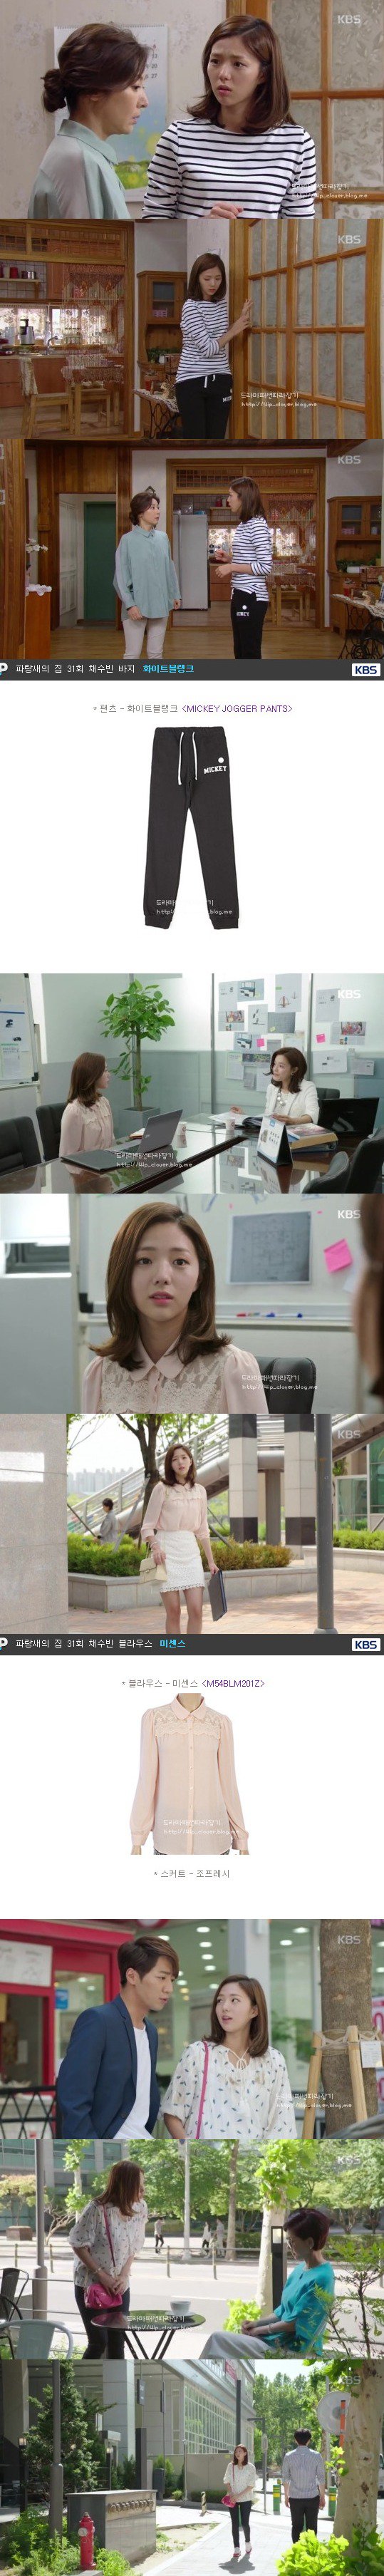 episodes 31 and 32 captures for the Korean drama 'Blue Bird Nest'